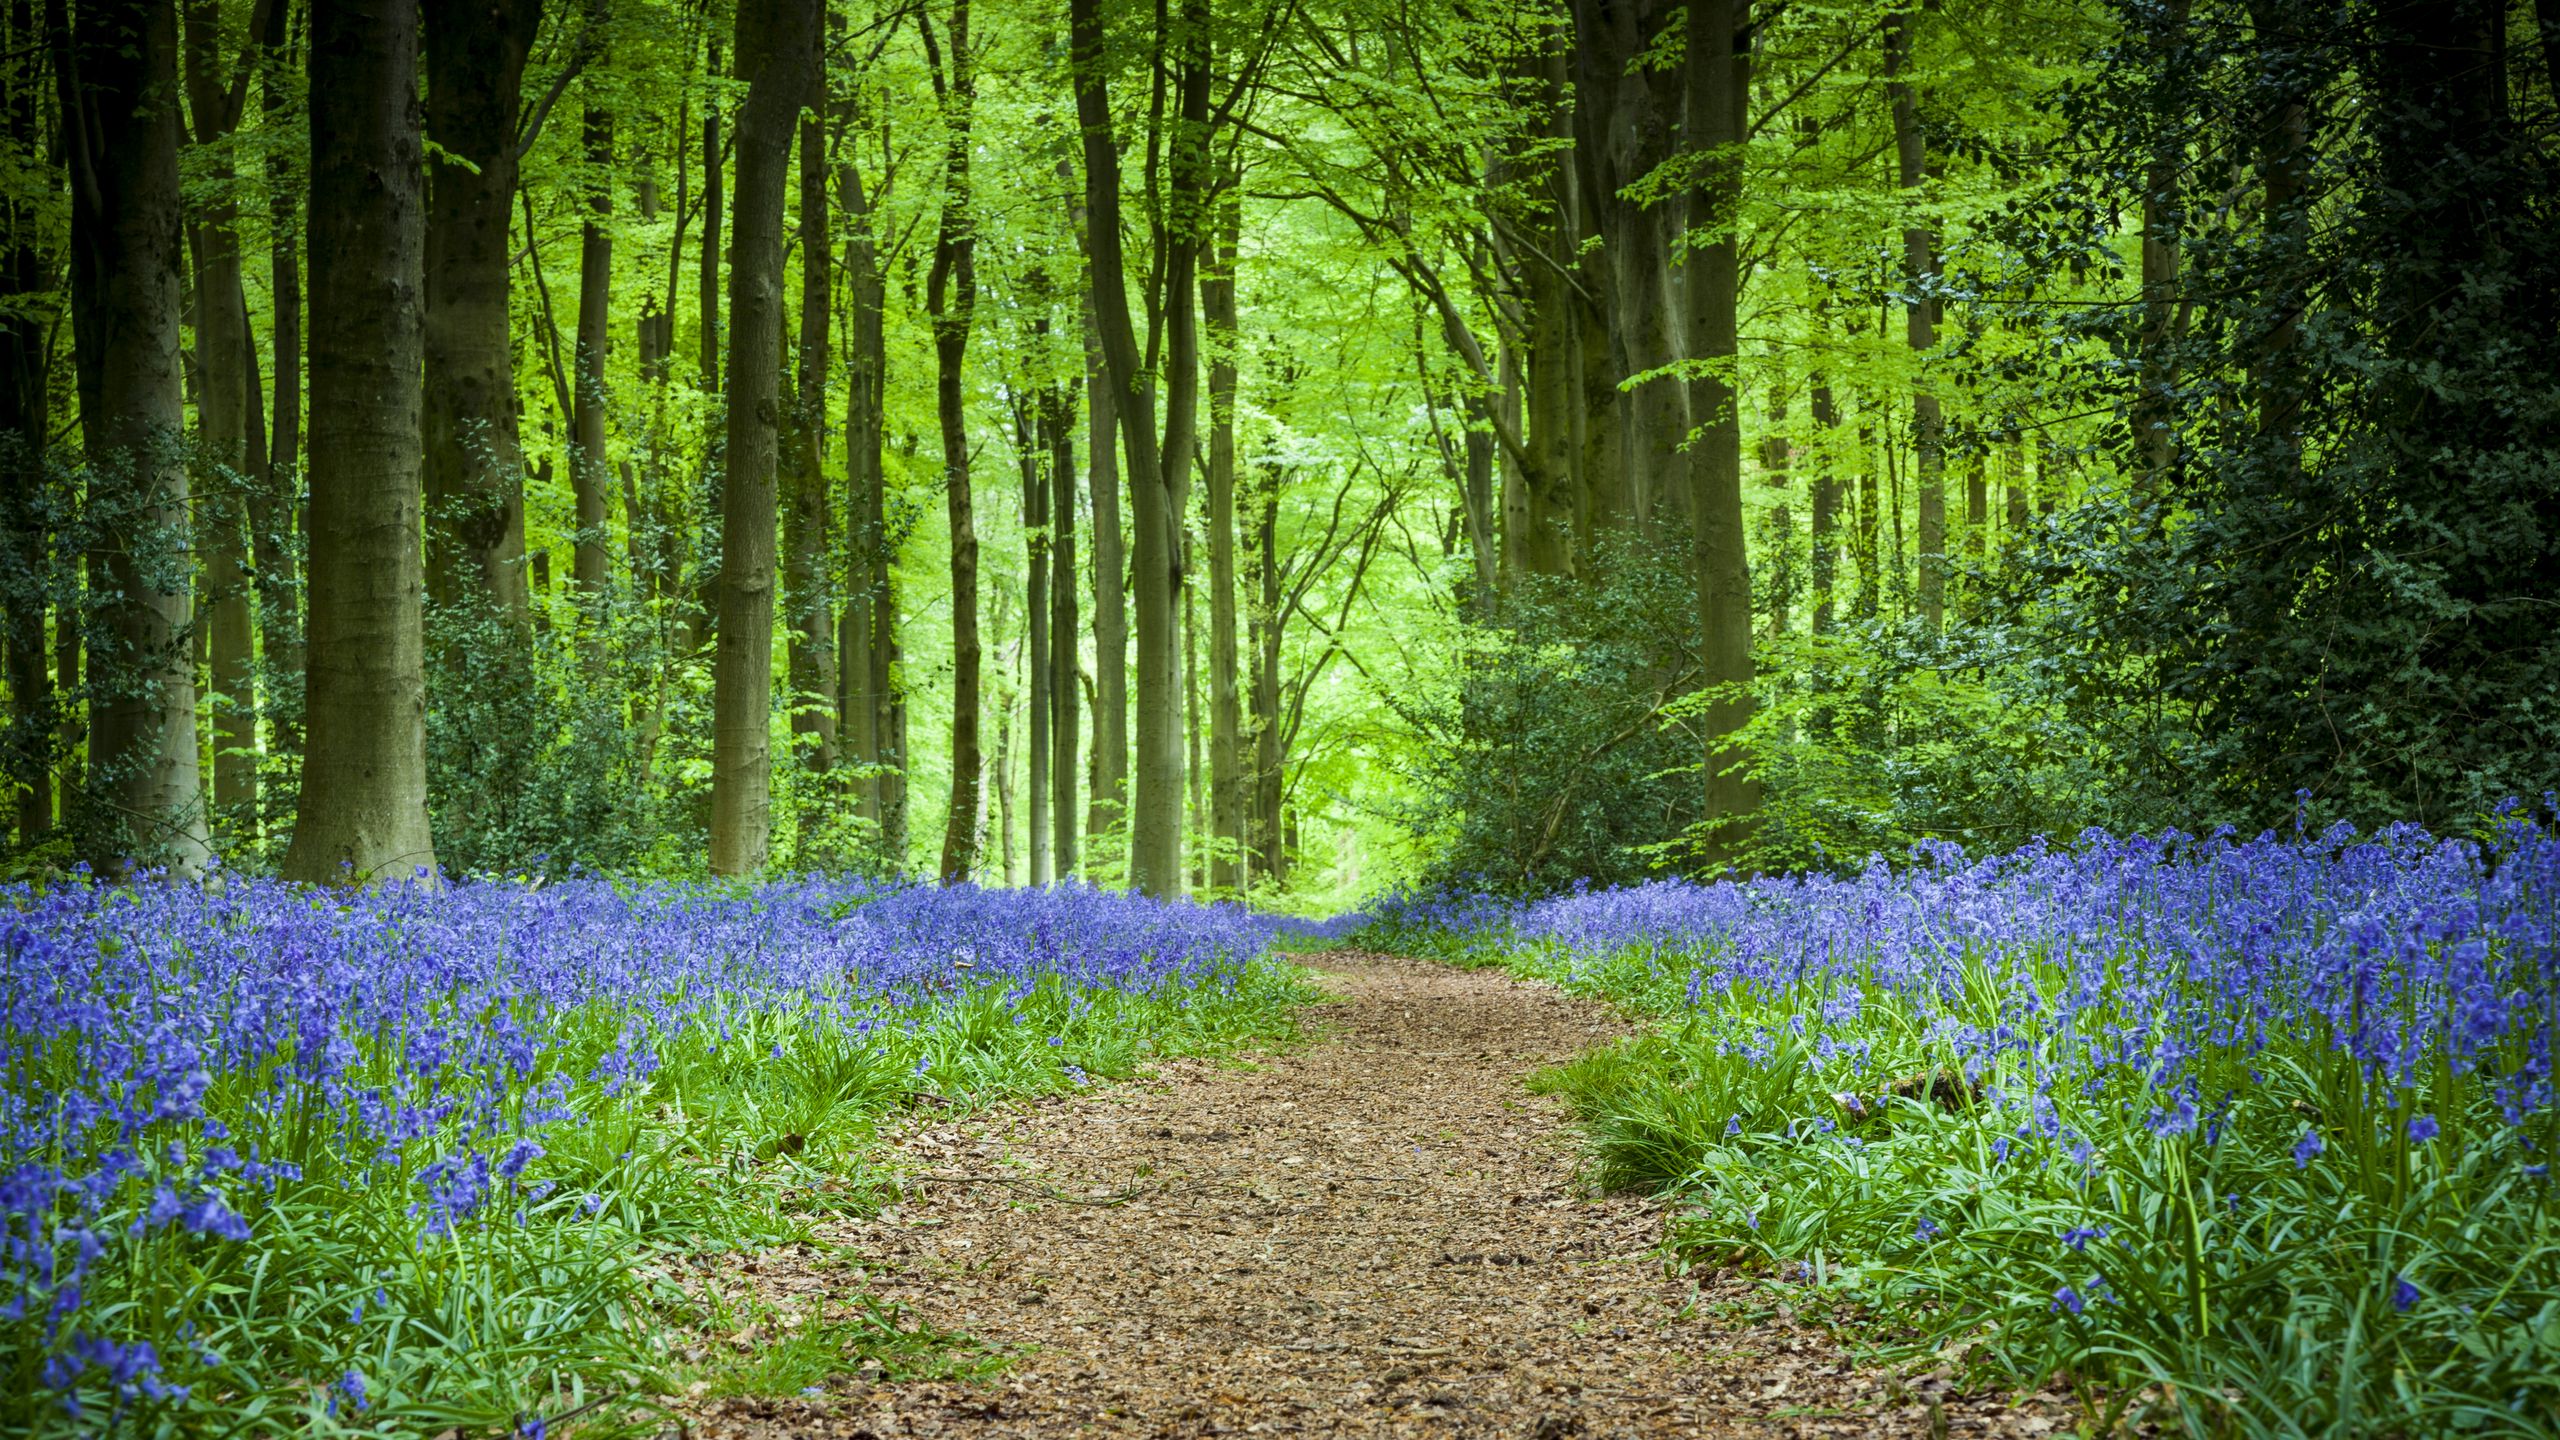 Download wallpaper 2560x1440 forest, path, flowers, spring widescreen 16:9 HD background